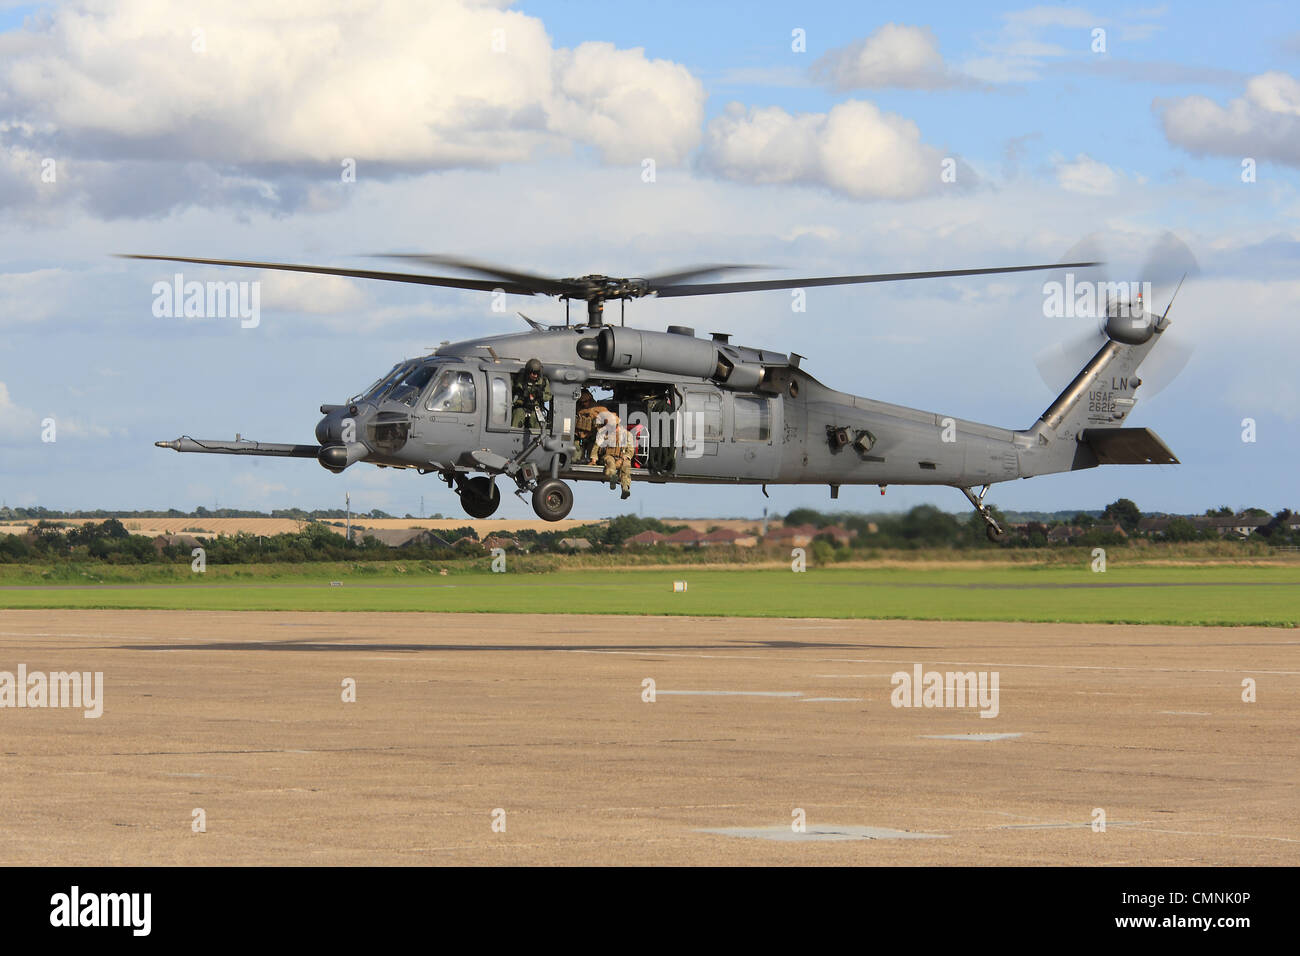 United States - US Air Force USAF Sikorsky HH-60G Pave Hawk Stock Photo